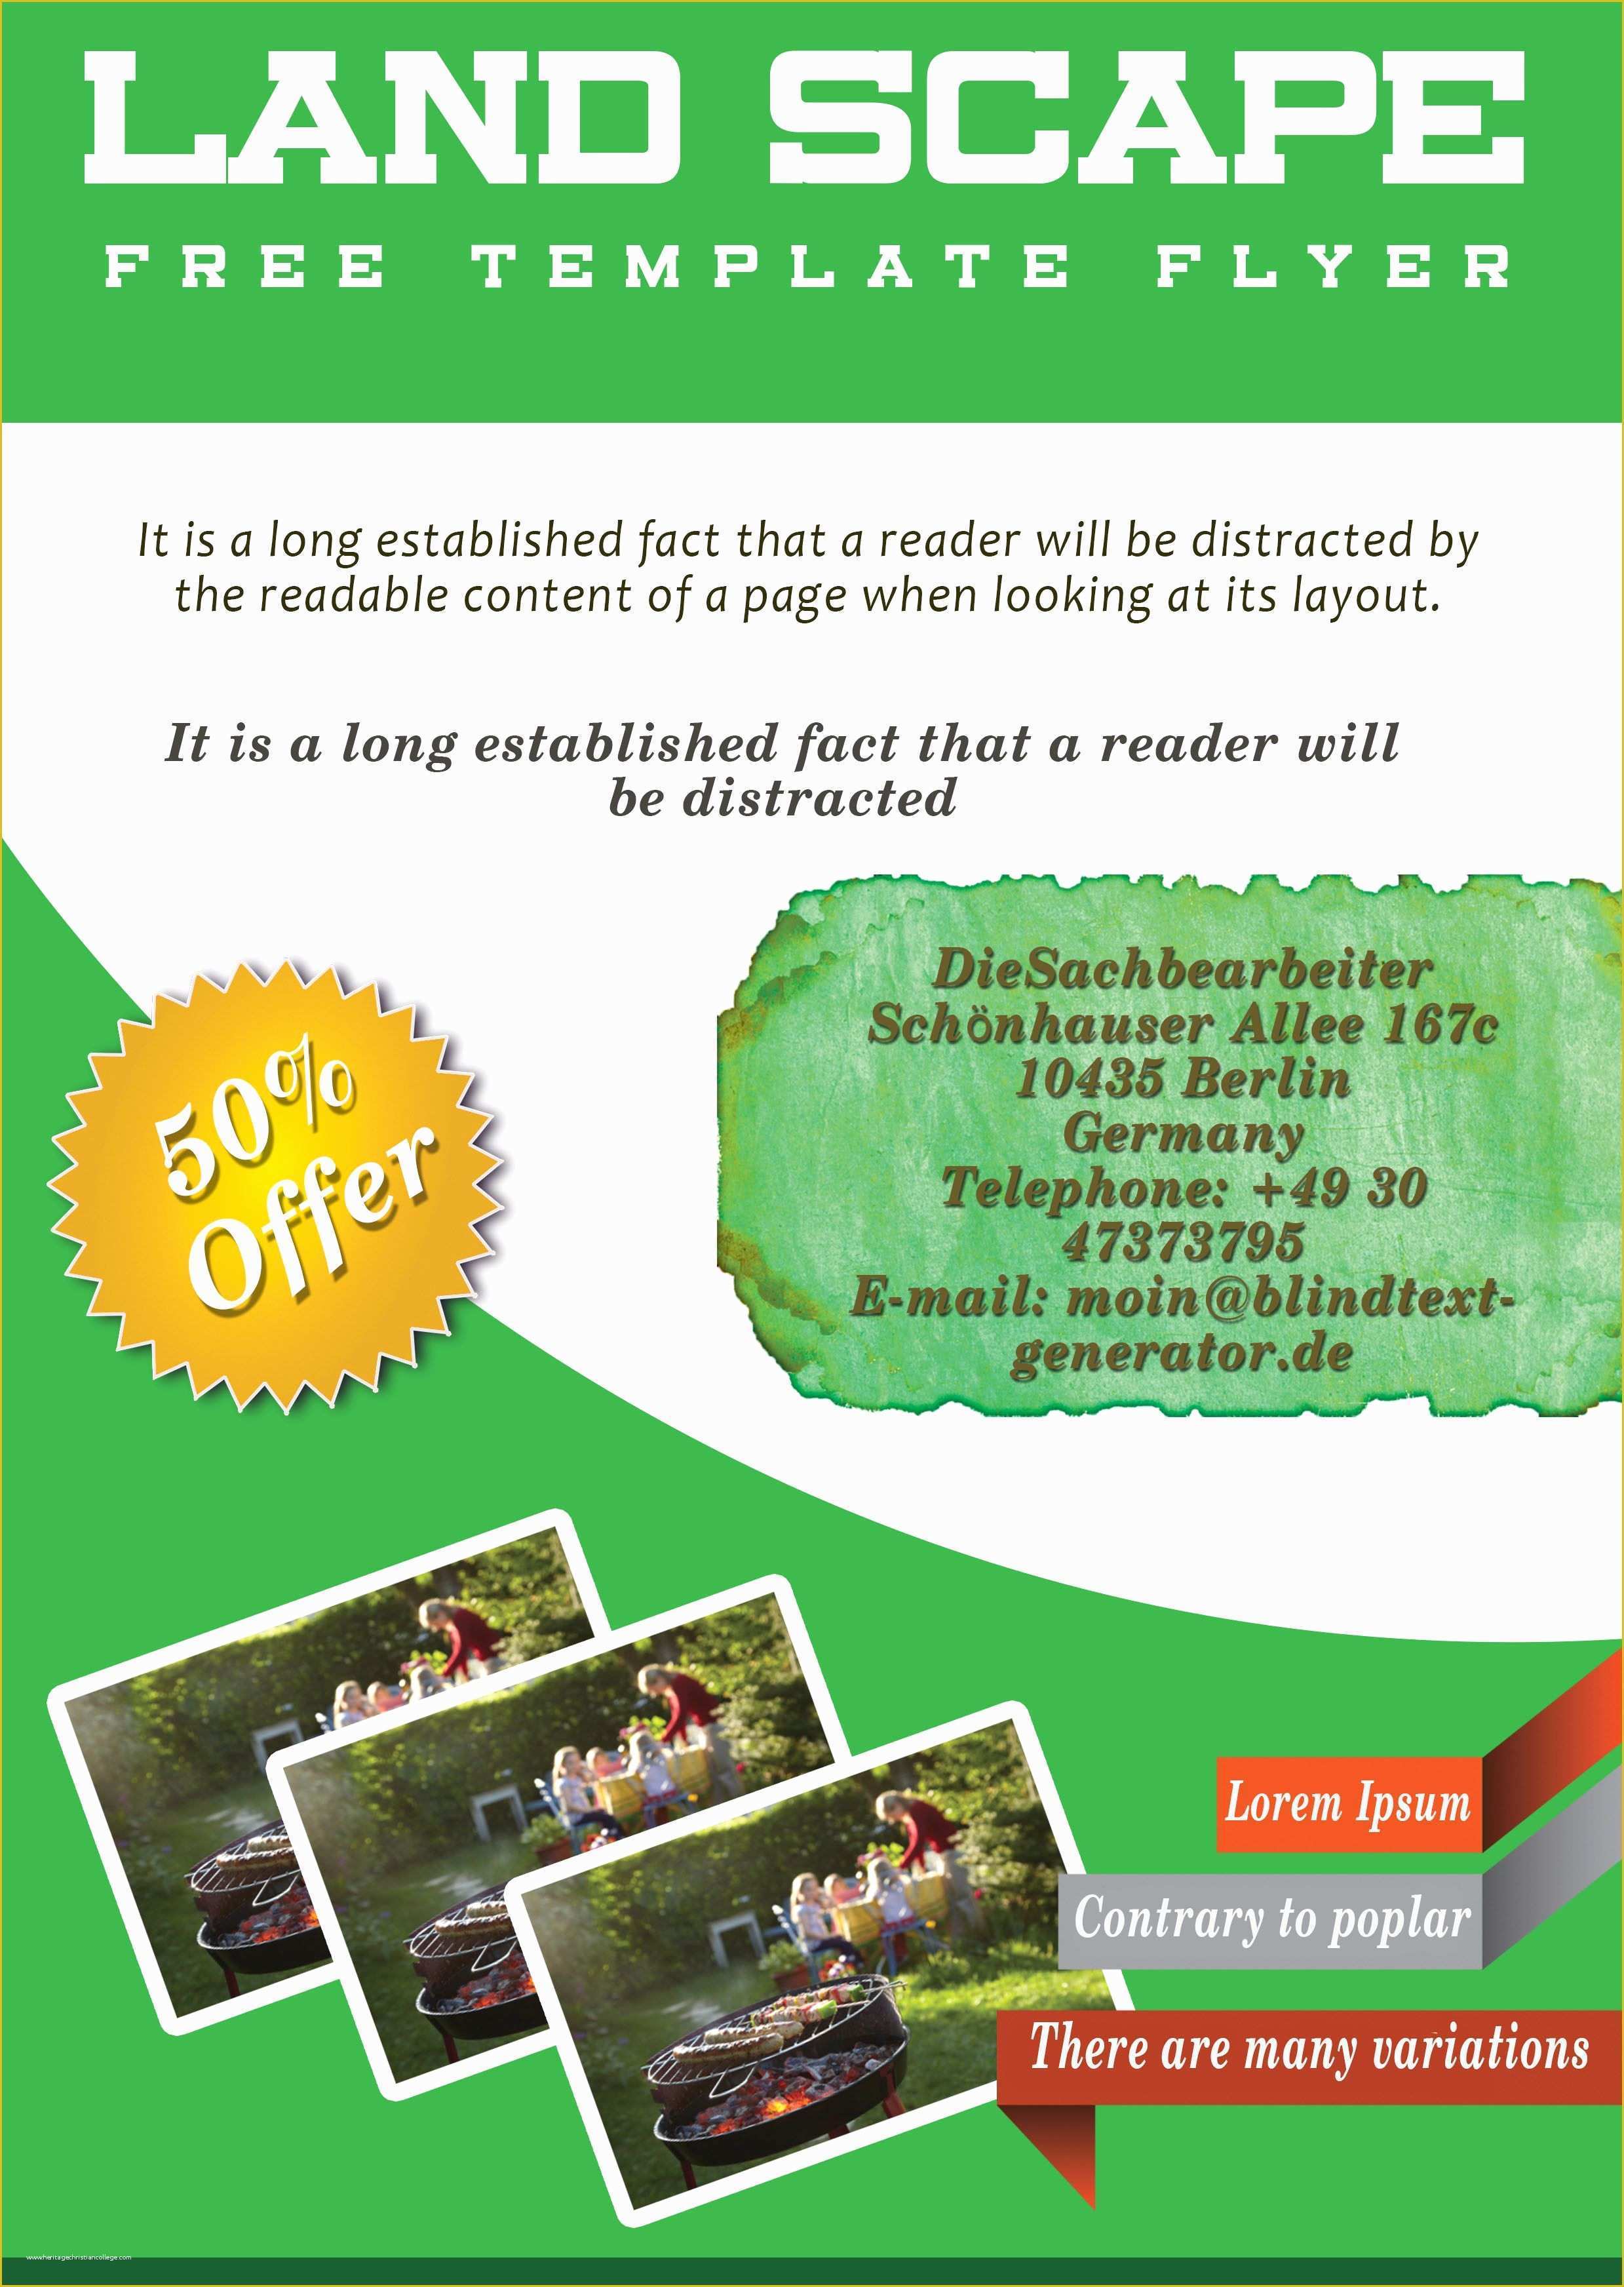 Free Agriculture Flyer Templates Of Free Landscaping Flyer Templates to Power Lawn Care